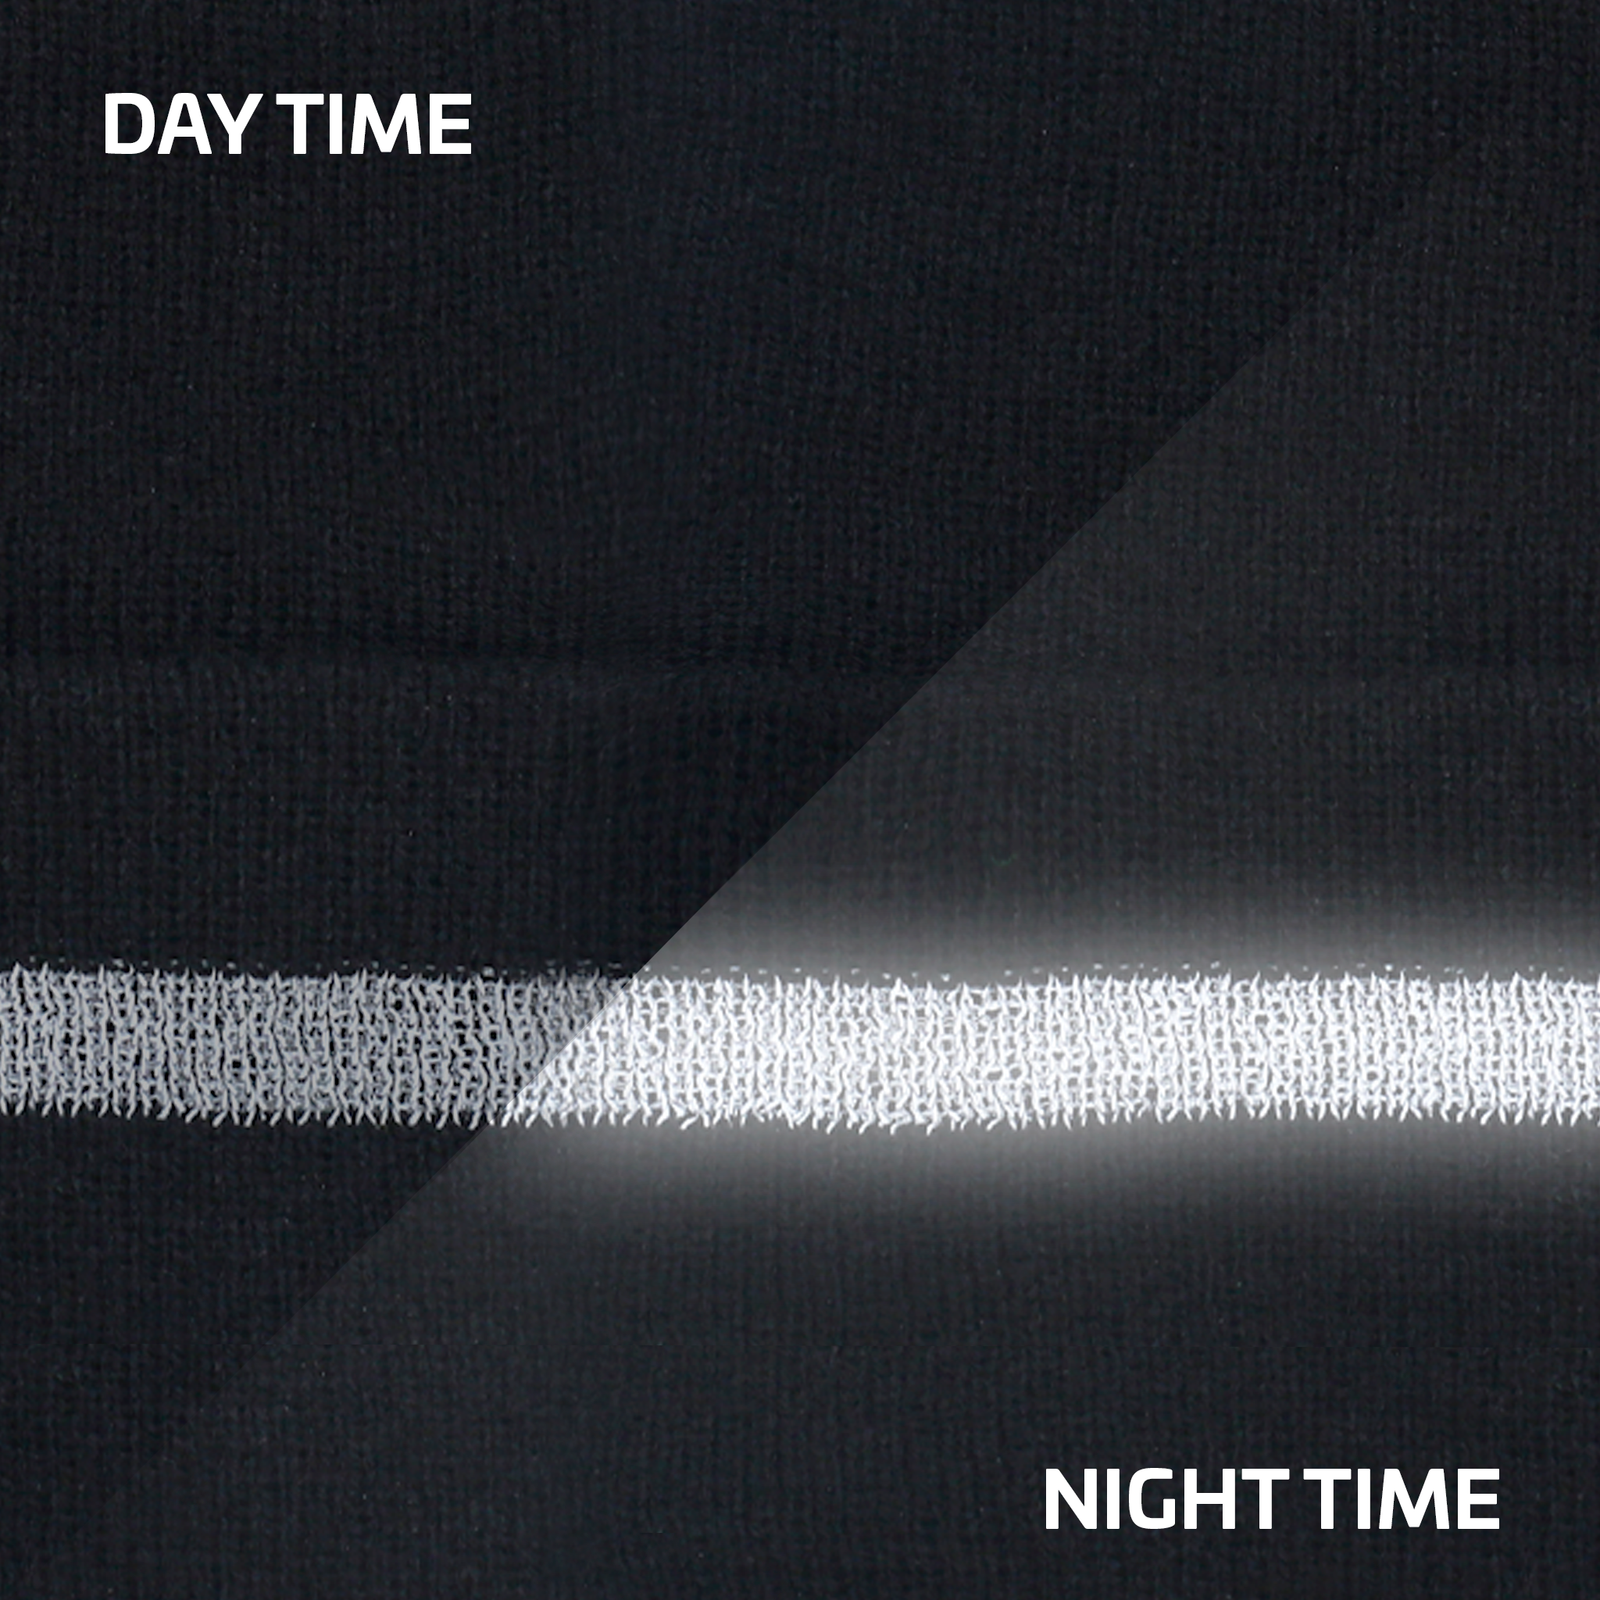 Close-up shows the reflective stripe of the black beanie hat during day and night time. Reflective stripe glows in the dark during night time.